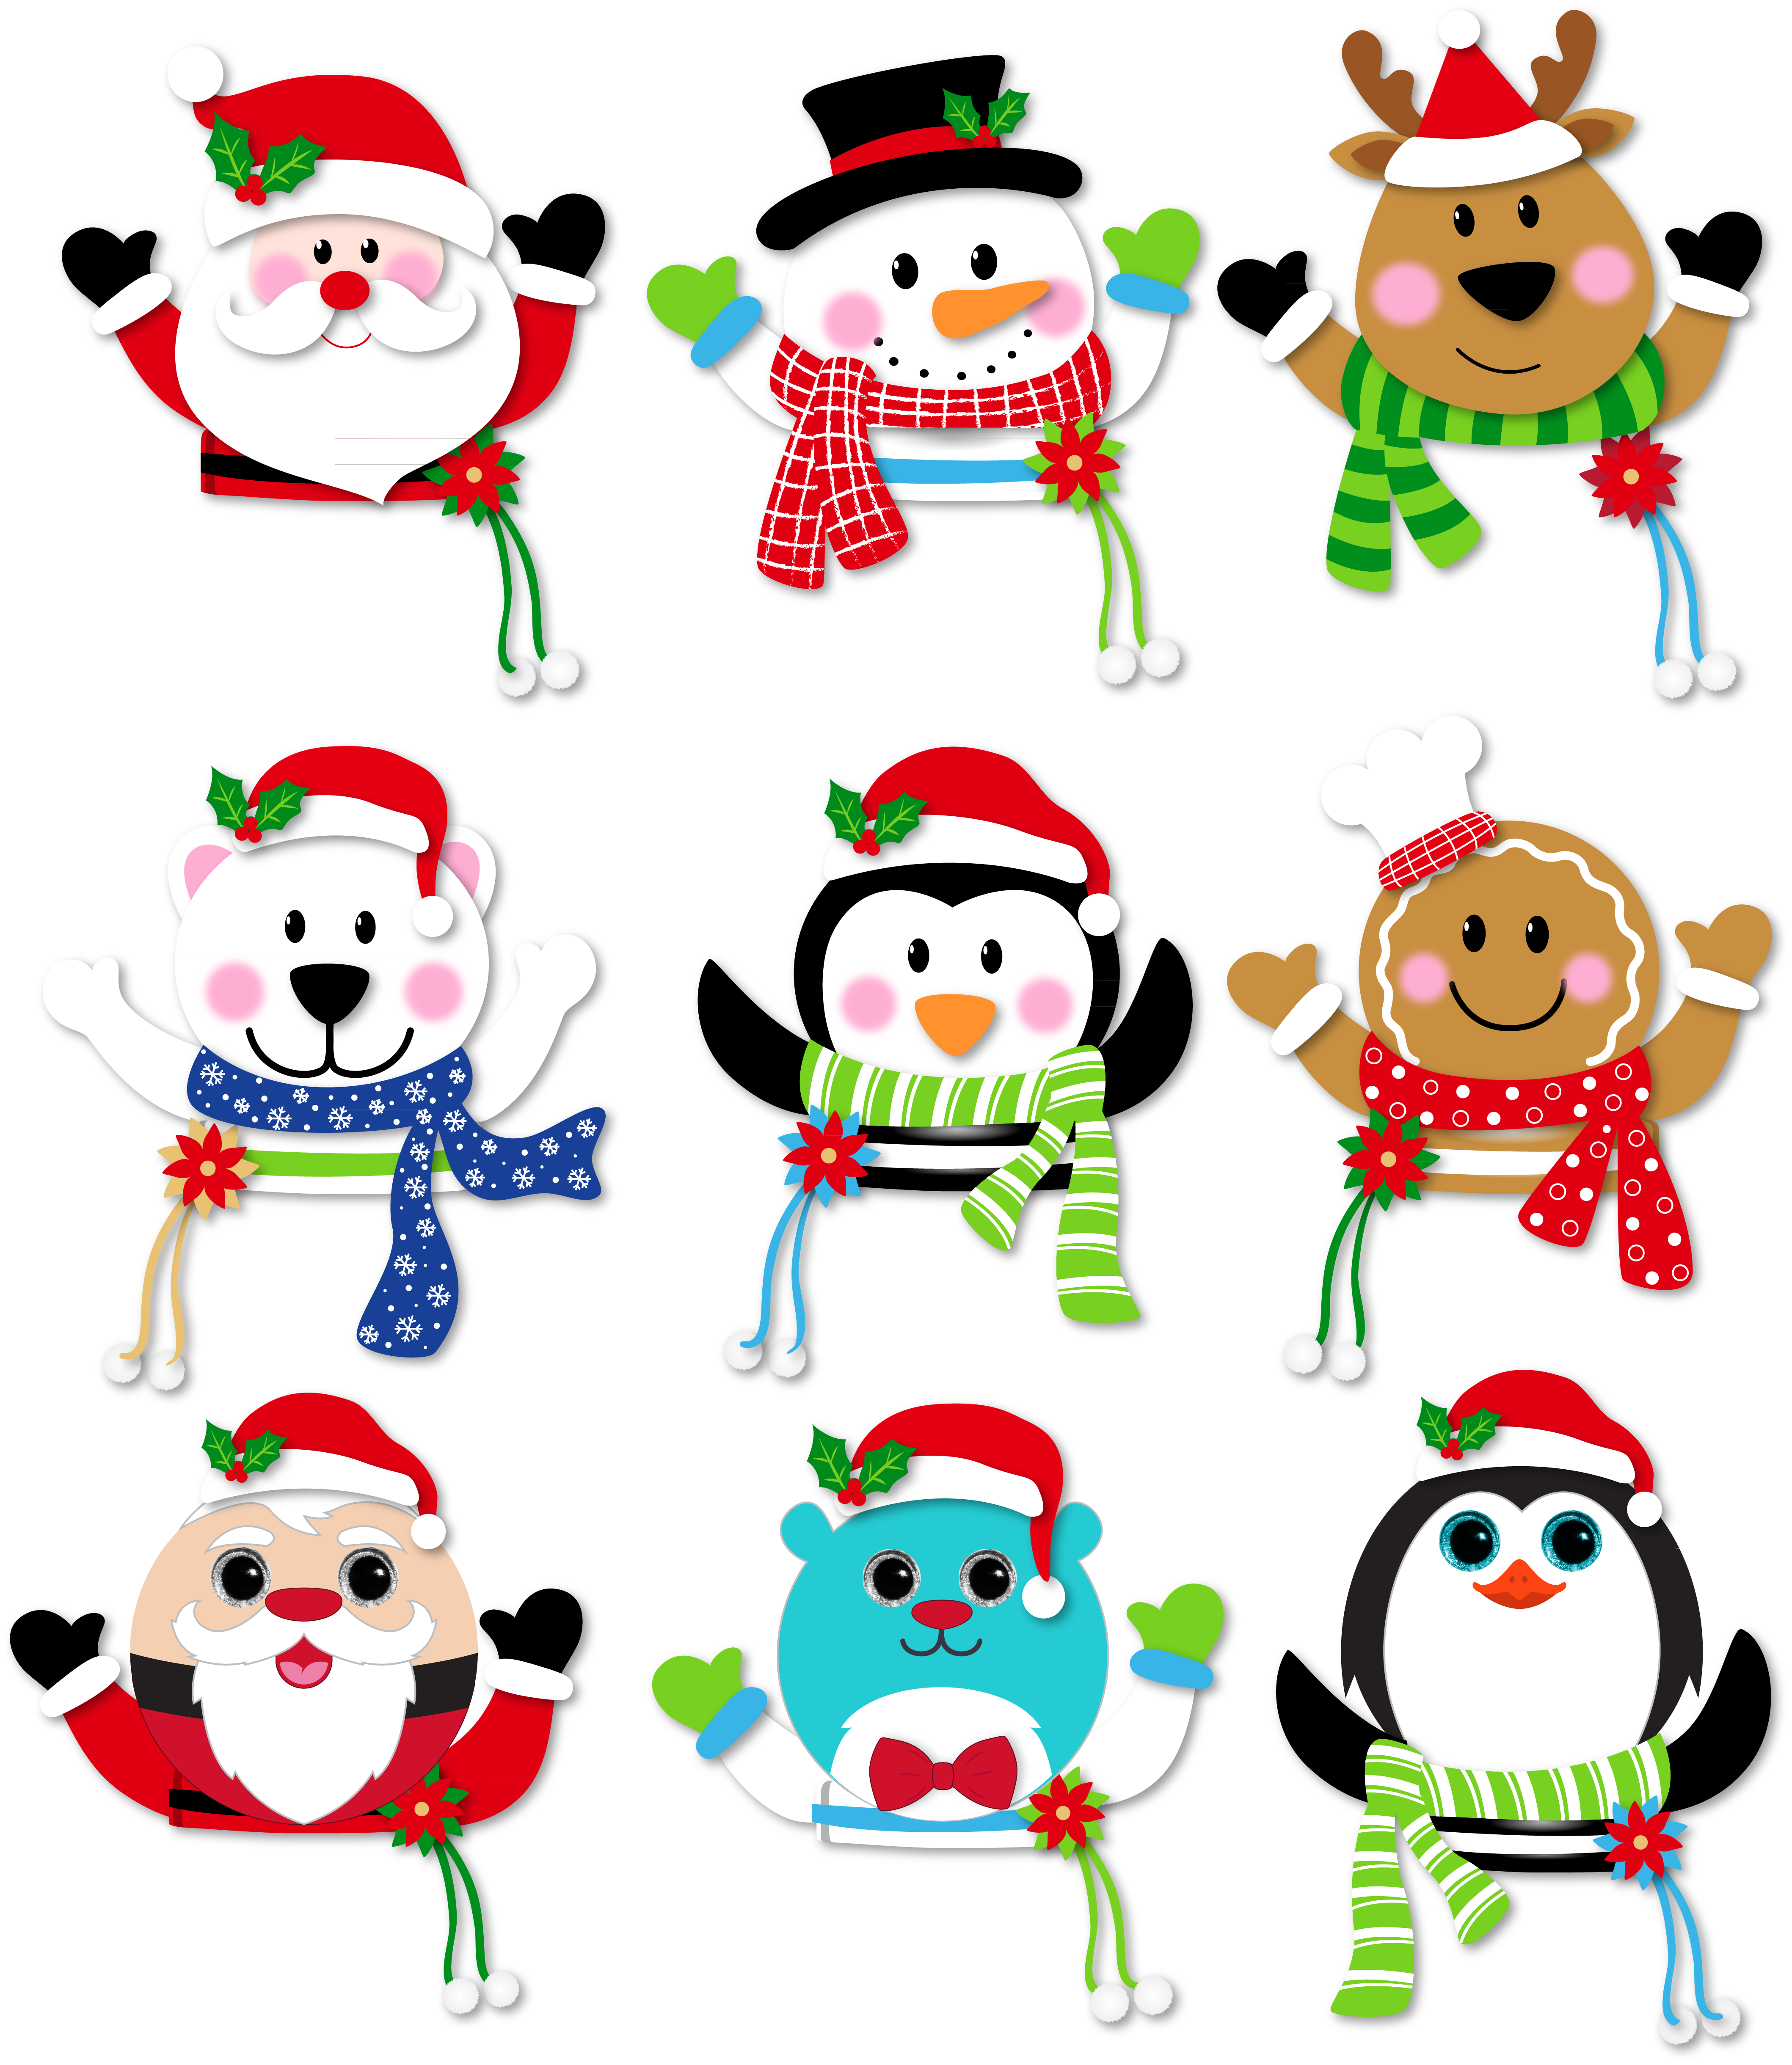 Claus Veronica Candy Ornament Snowman PNG